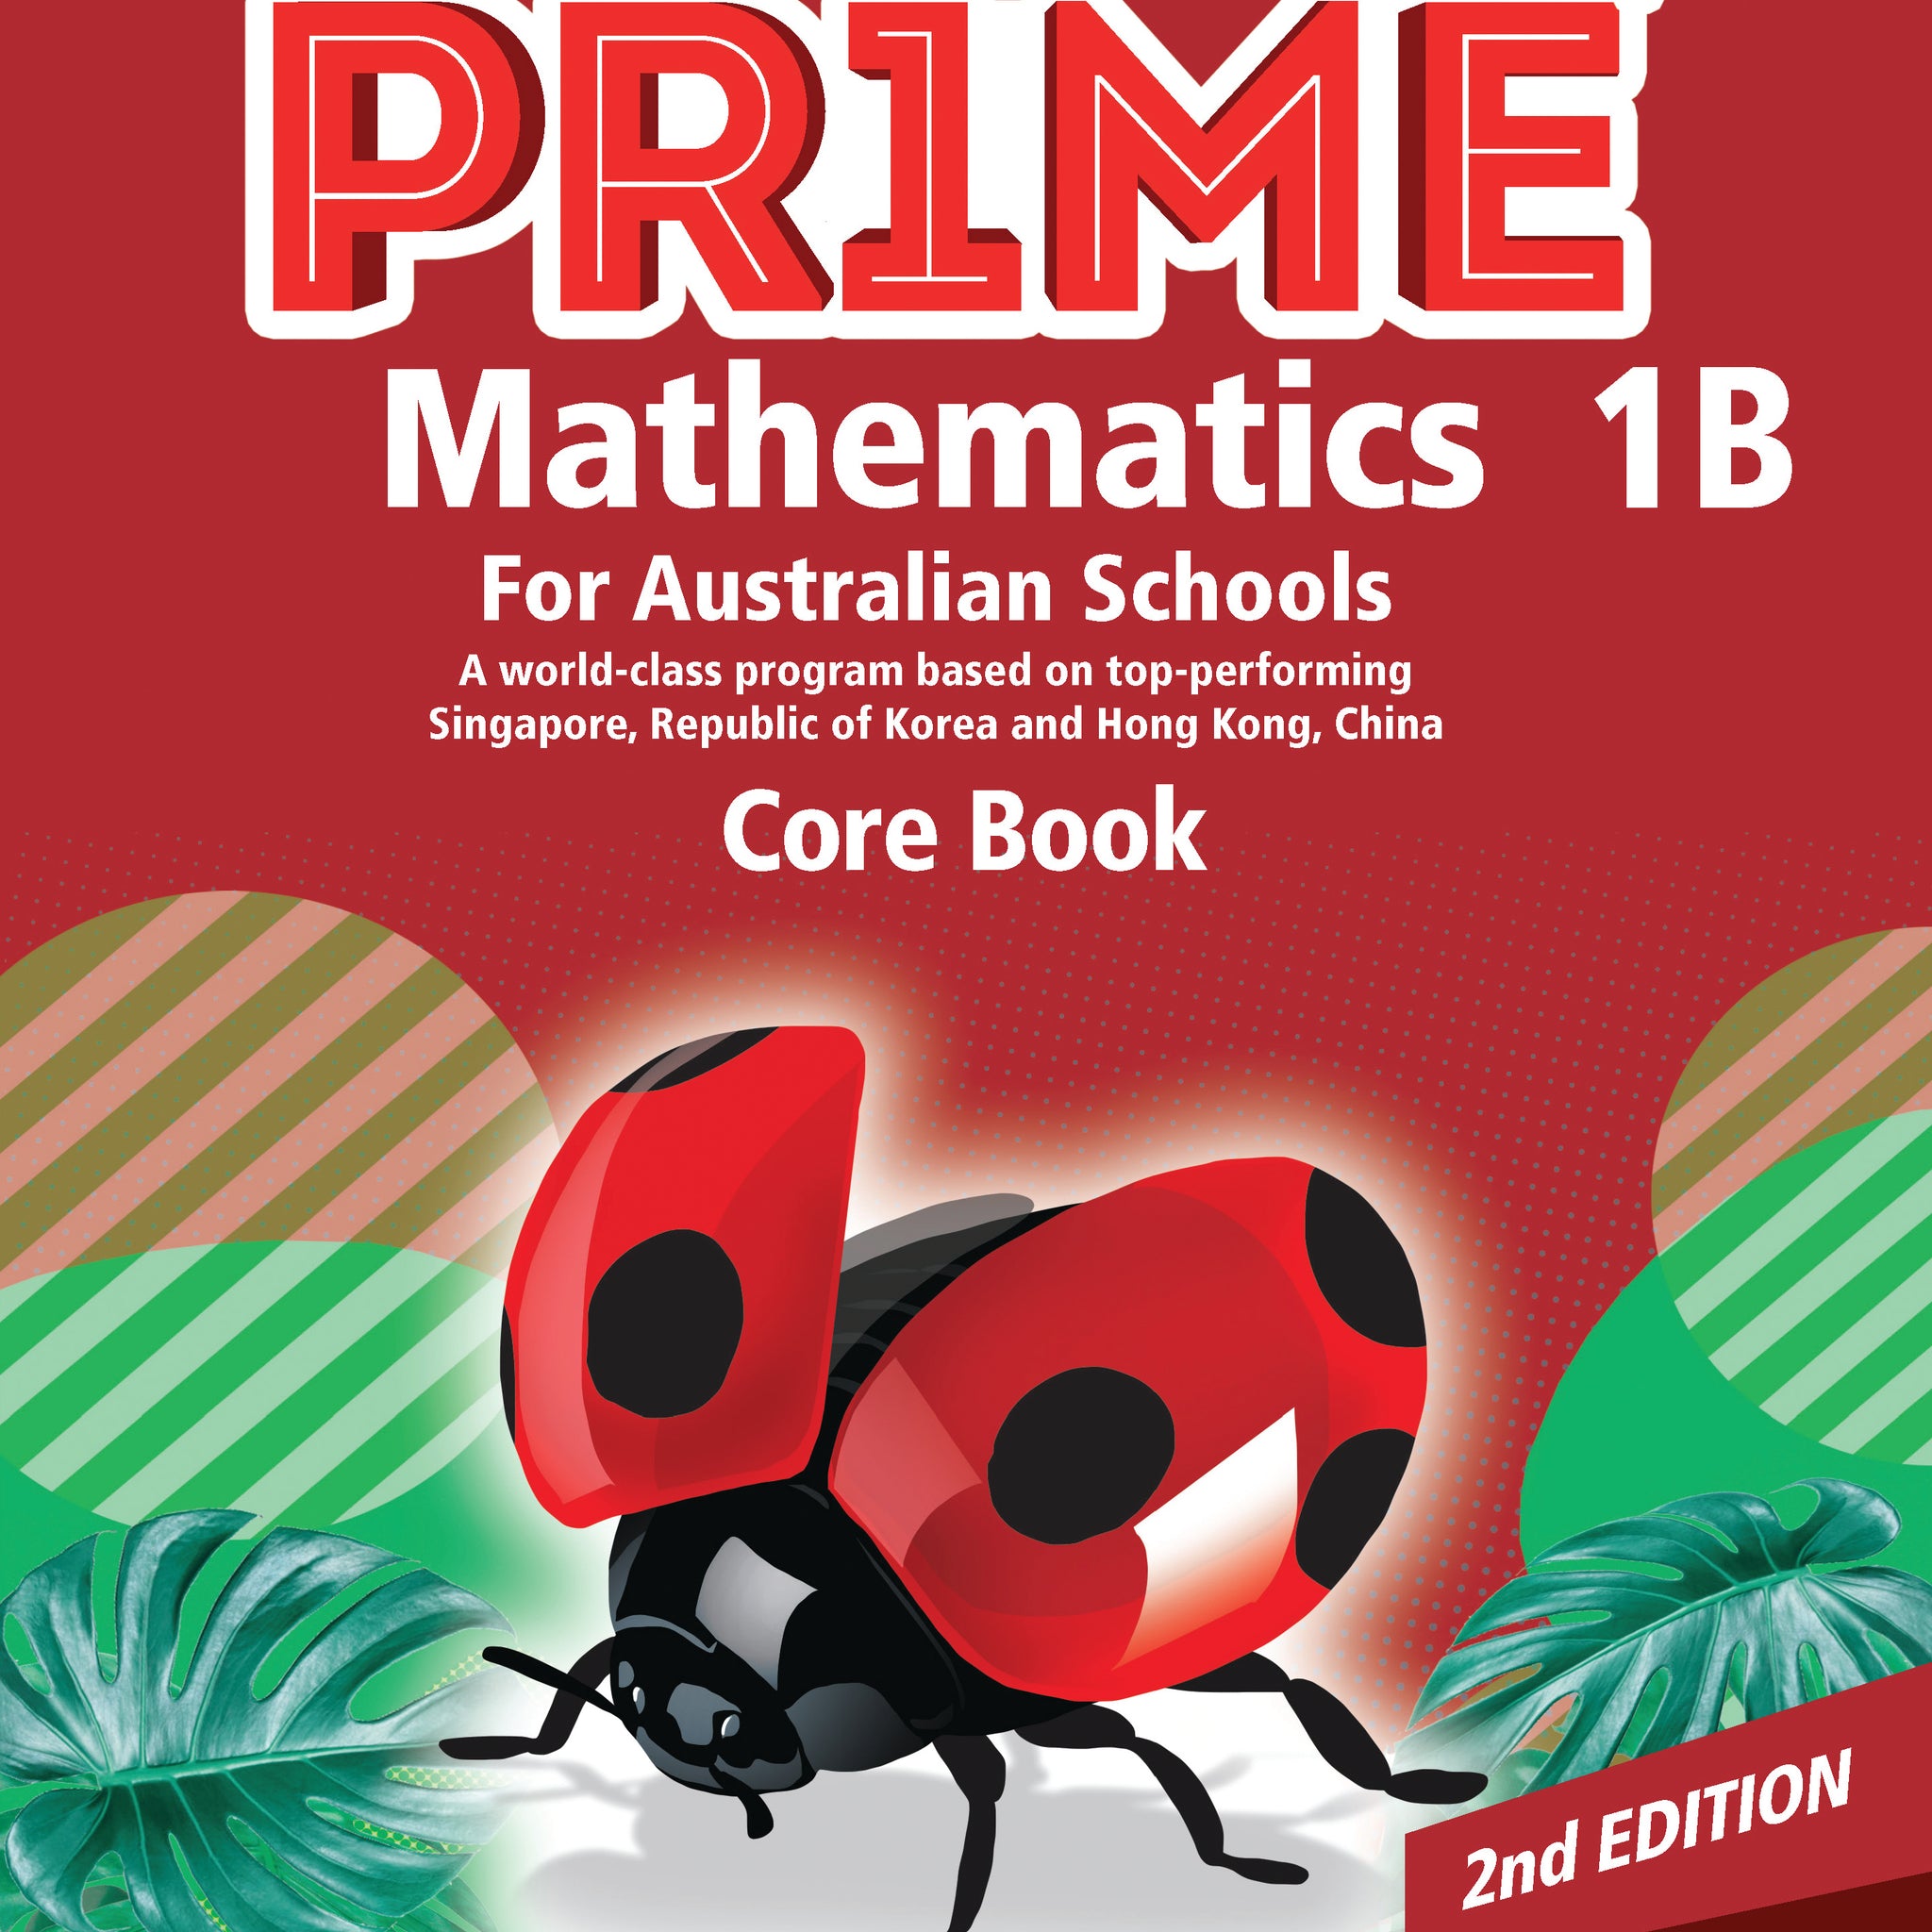 PRIME AUS Student Book 1B (2nd Edition)